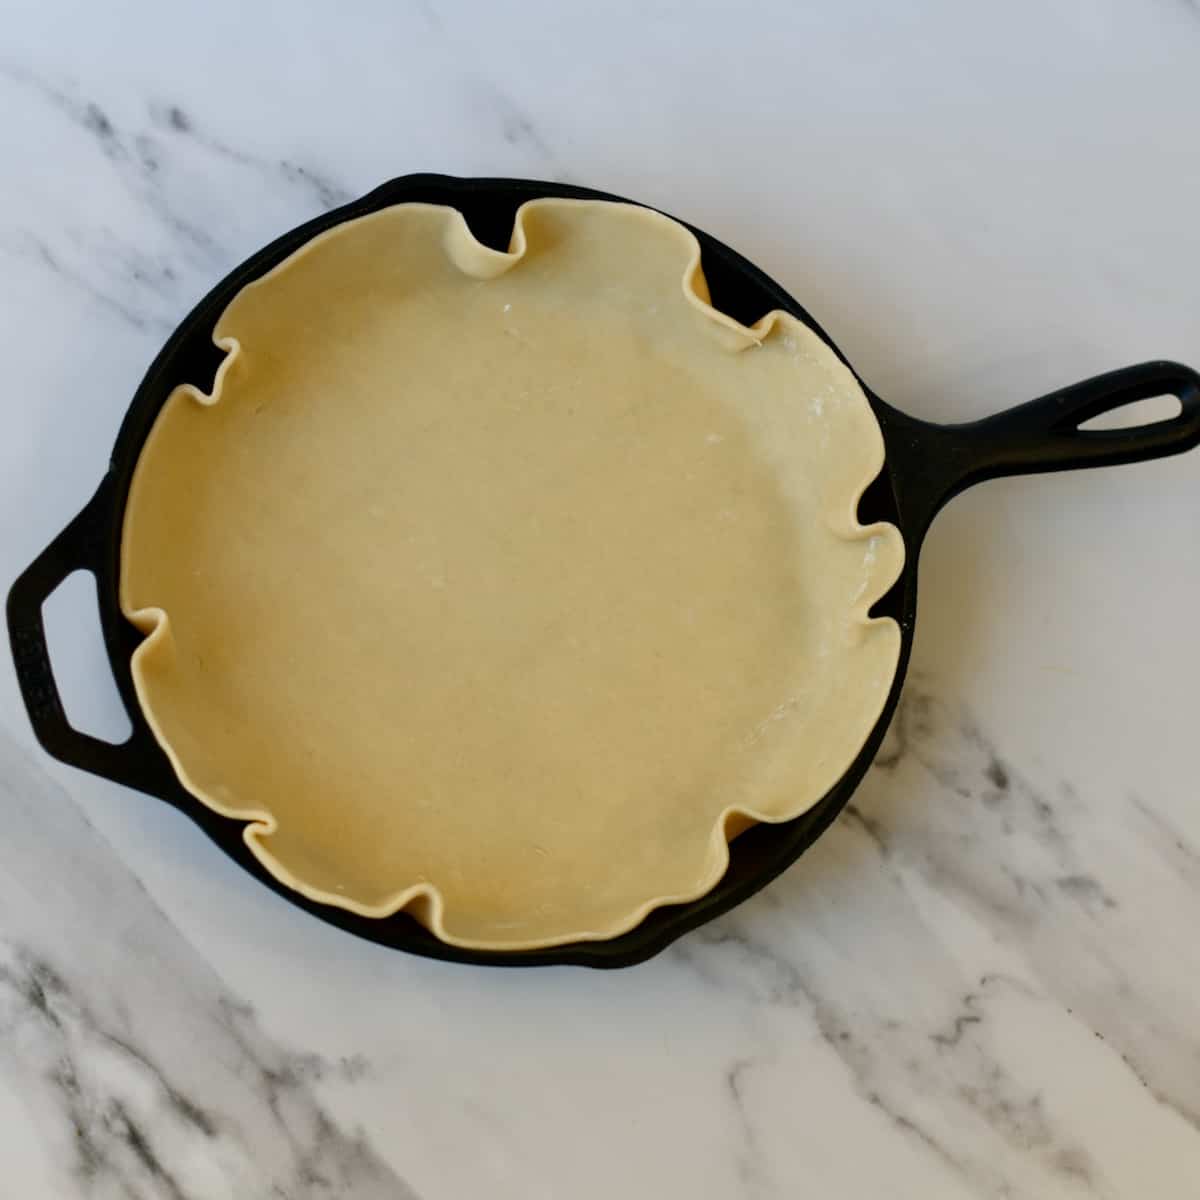 Unbaked pie crust fitted in to cast iron skillet.